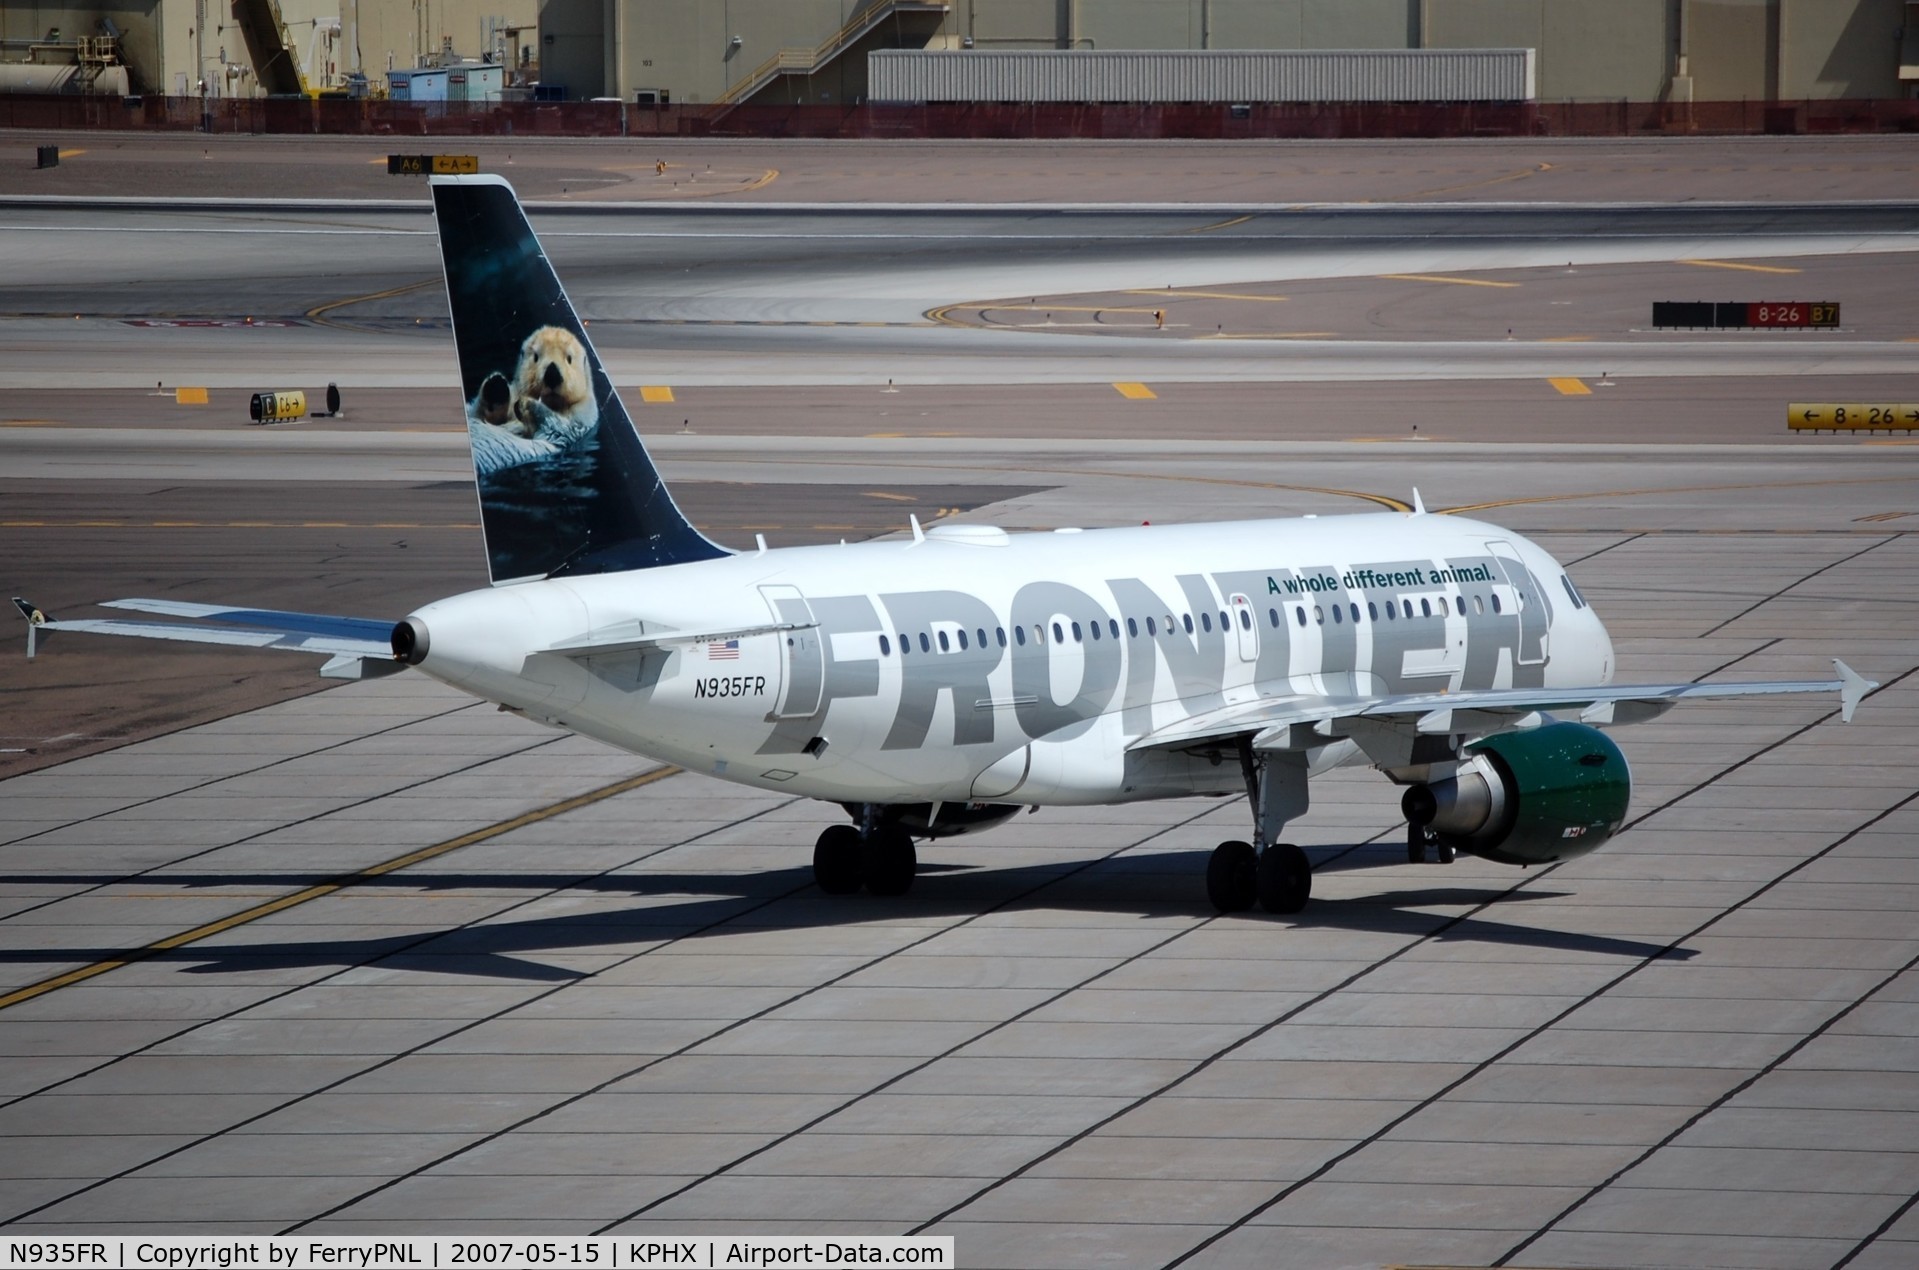 N935FR, 2004 Airbus A319-111 C/N 2318, Frontier Sea Otter A319 called Hector